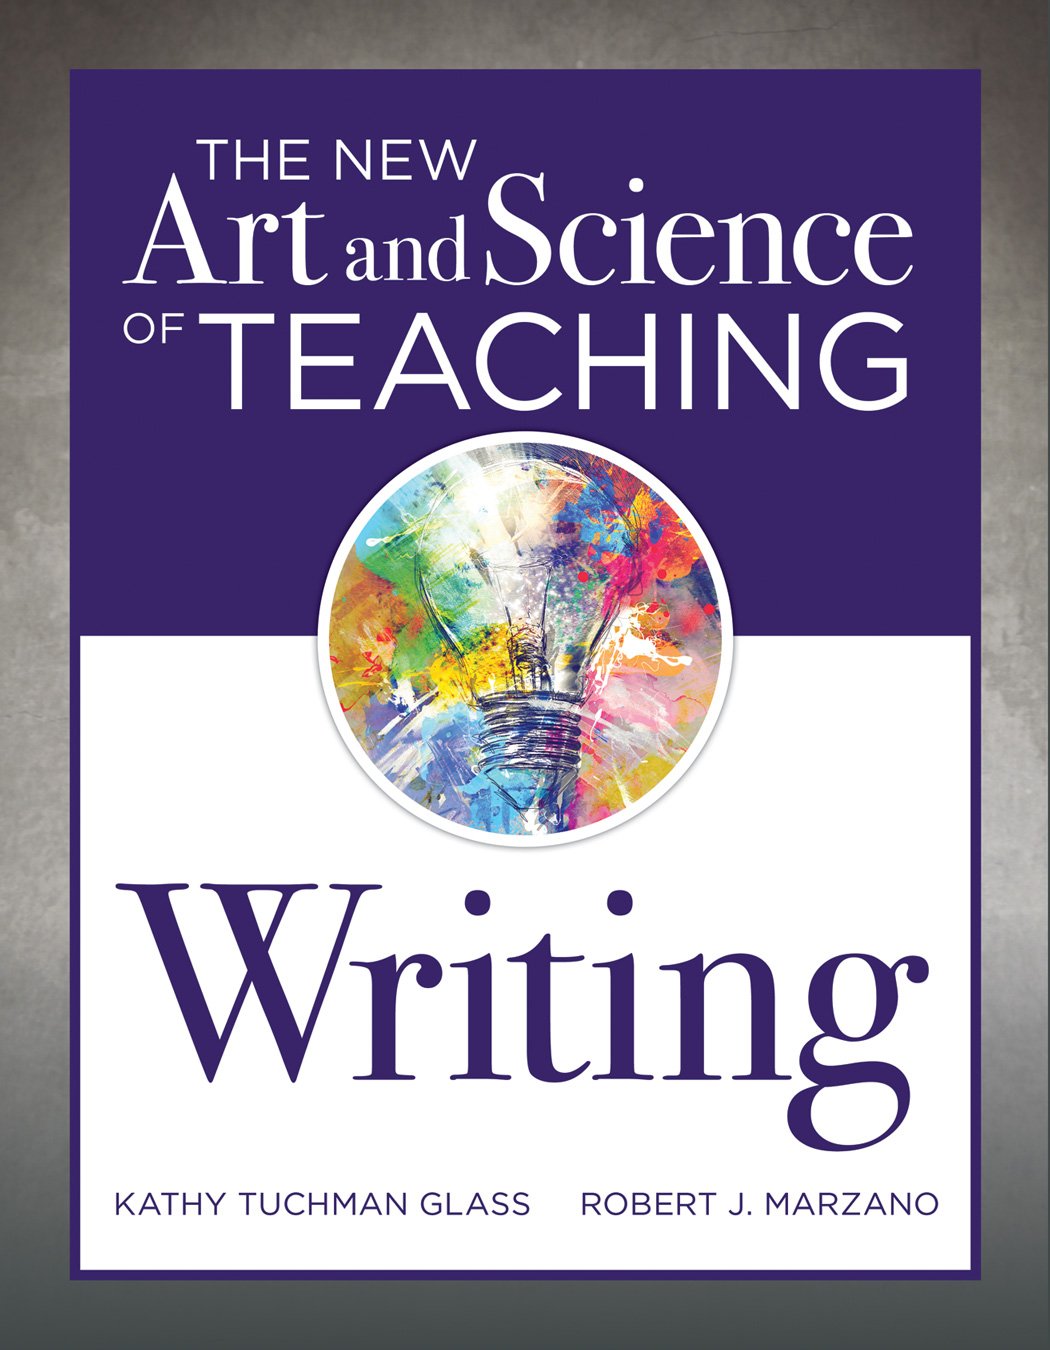 The New Art and Science of Teaching Writing (Research-Based Instructional Strategies for Teaching and Assessing Writing Skills) (The New Art and Science of Teaching Book Series)